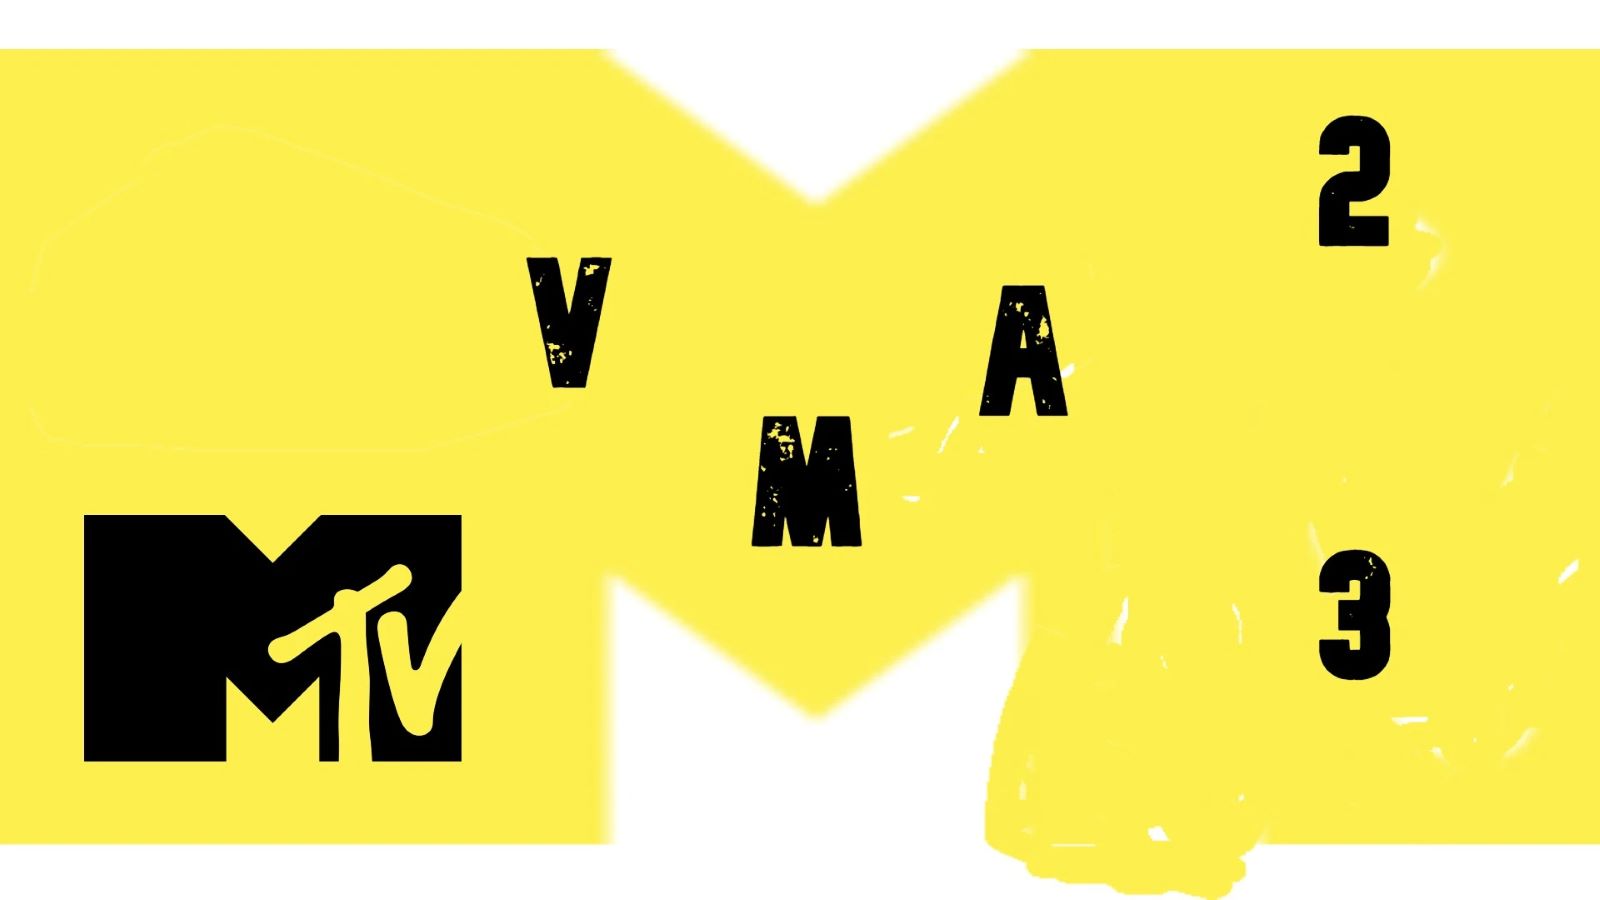 MTV VMAs 2023, live worldwide on September 12 from the Prudential Center in New Jersey